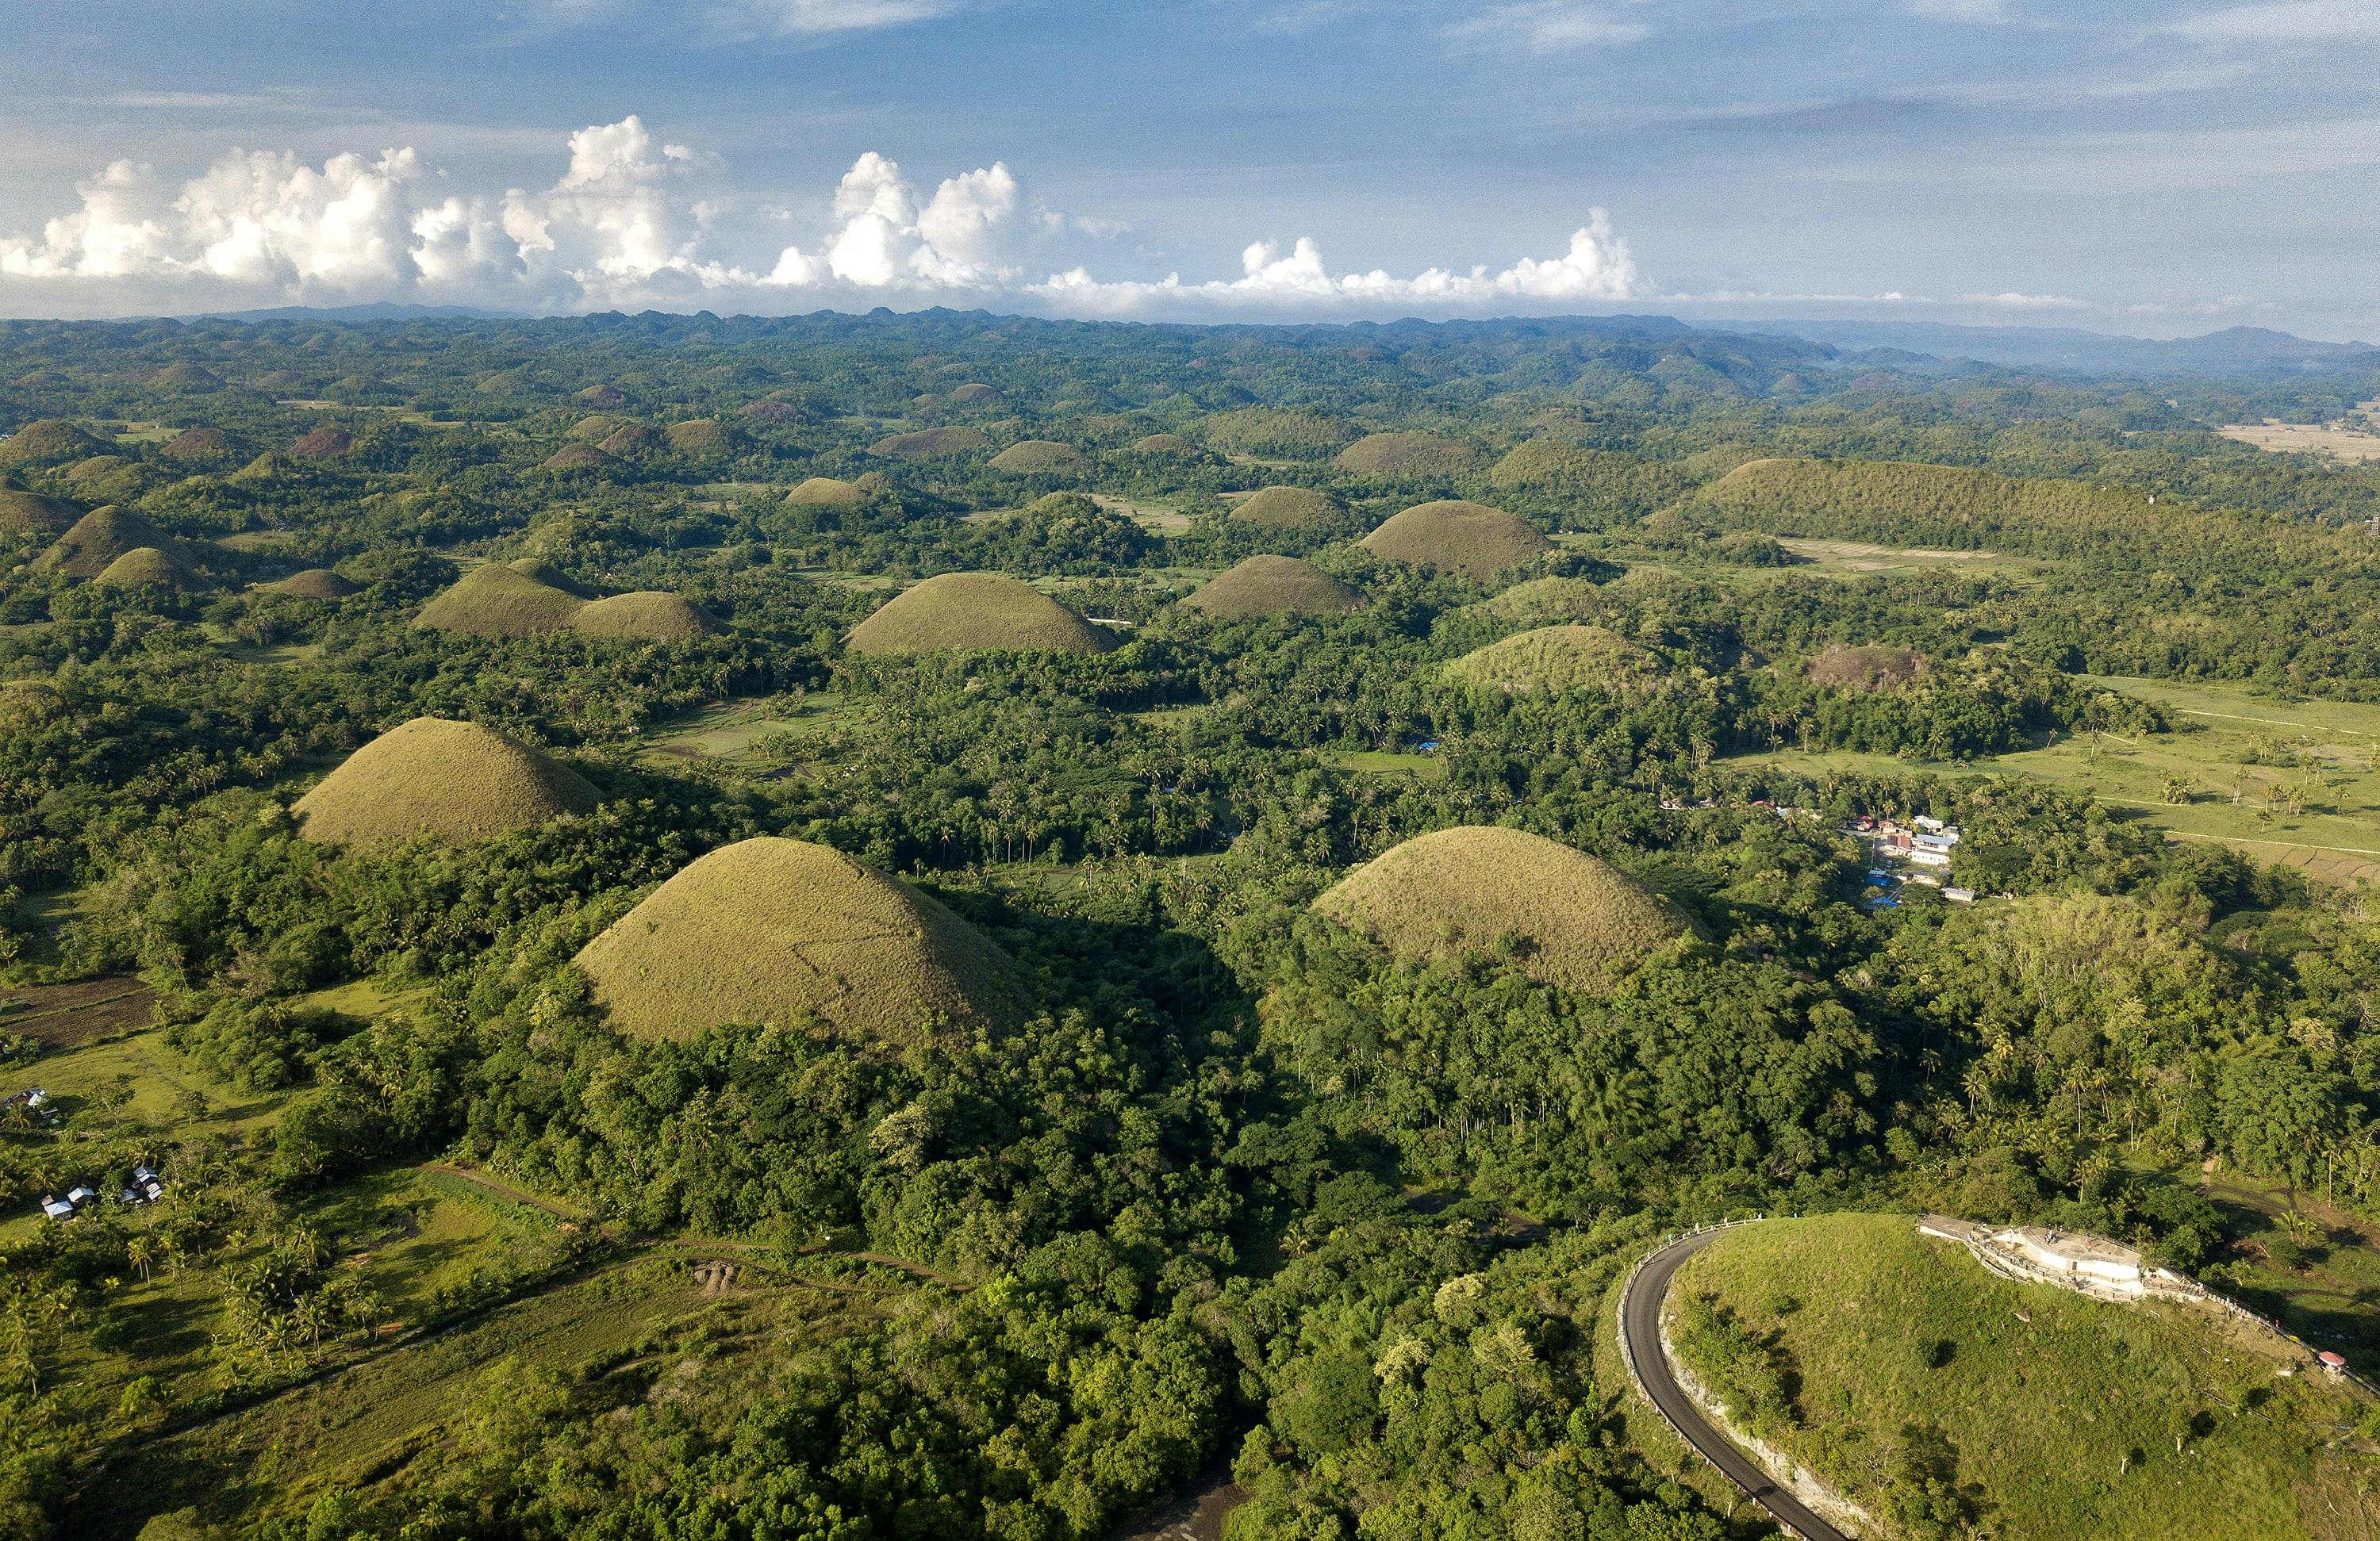 Chocolate Hills in Bohol during summertime